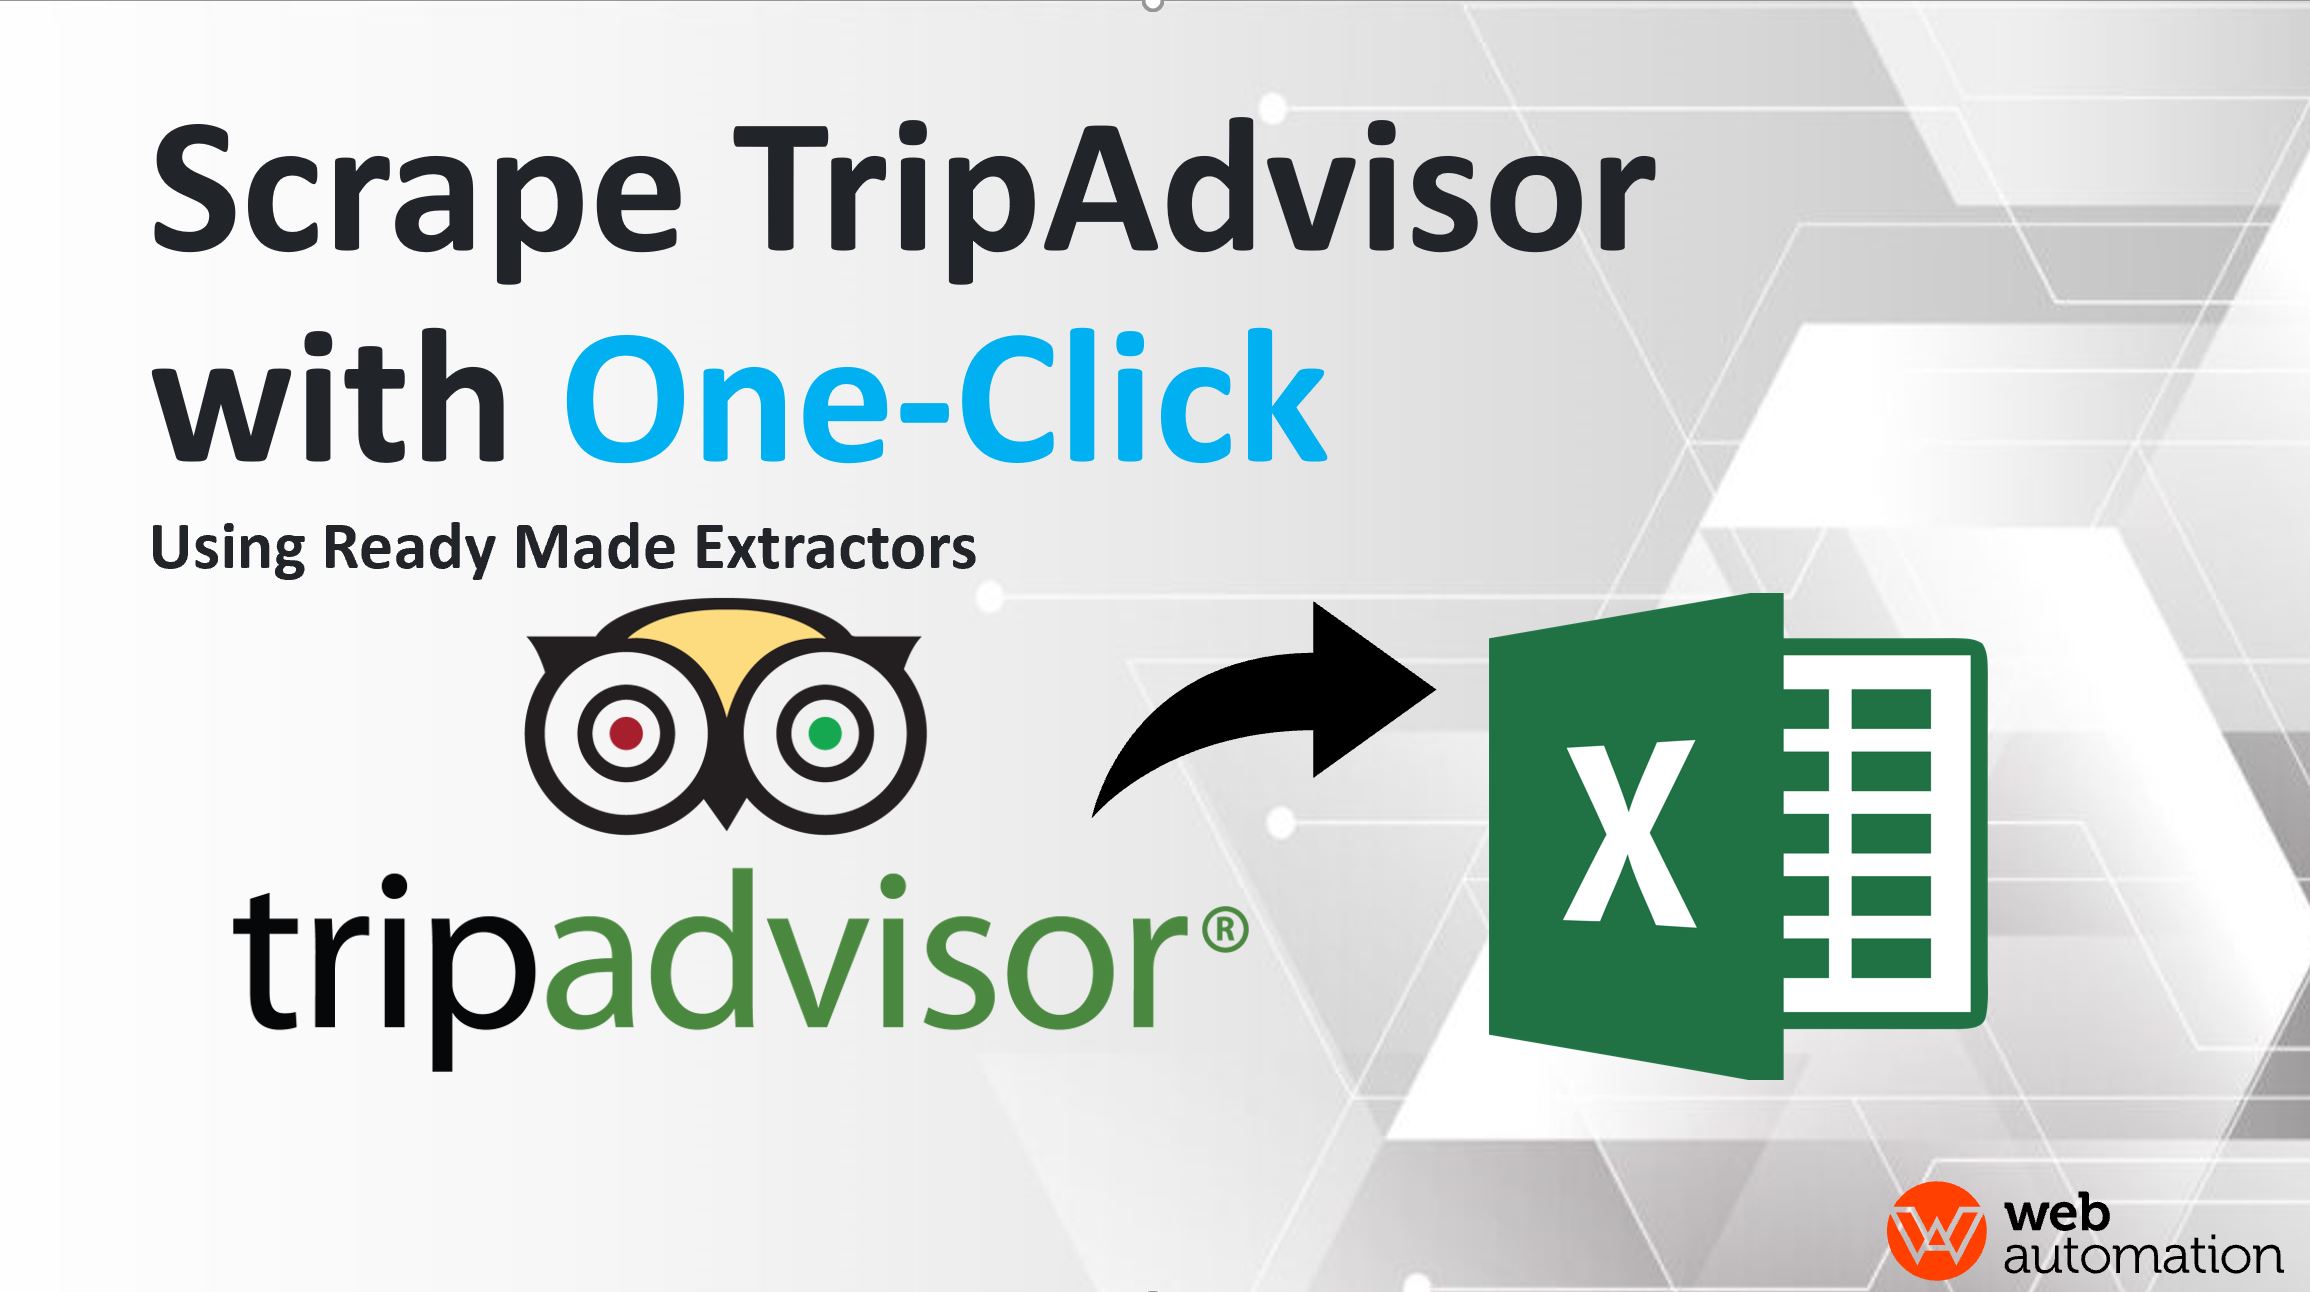 how to scrape tripadvisor hotels, restaurants and attractions for leads (no code)